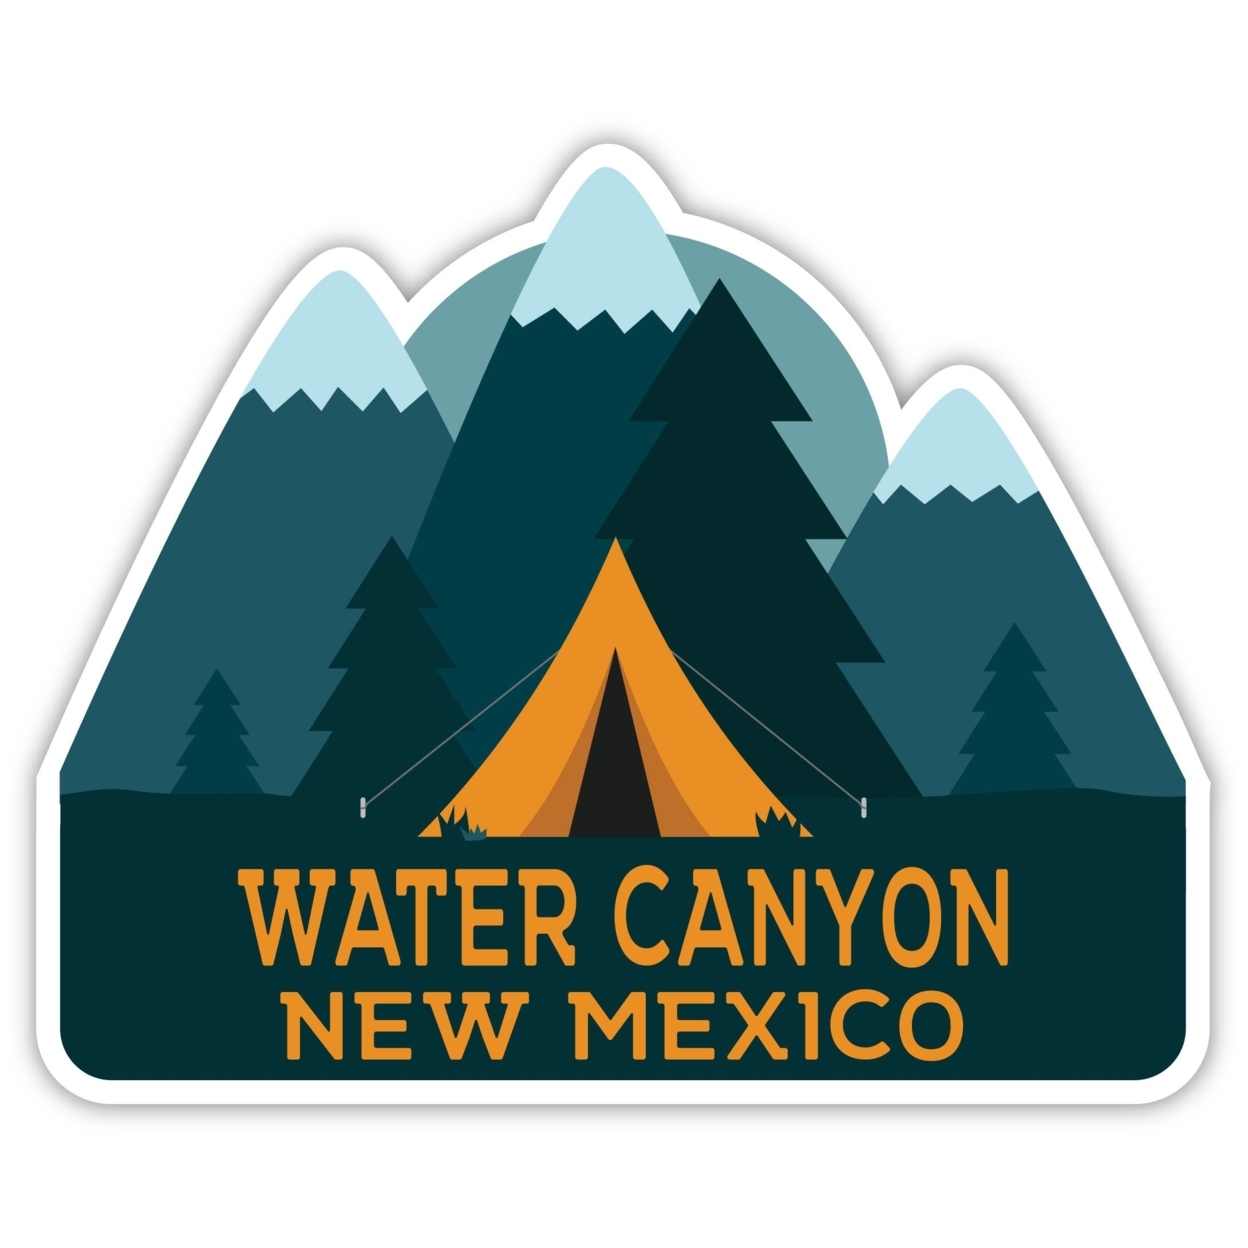 Water Canyon New Mexico Souvenir Decorative Stickers (Choose Theme And Size) - Single Unit, 4-Inch, Tent